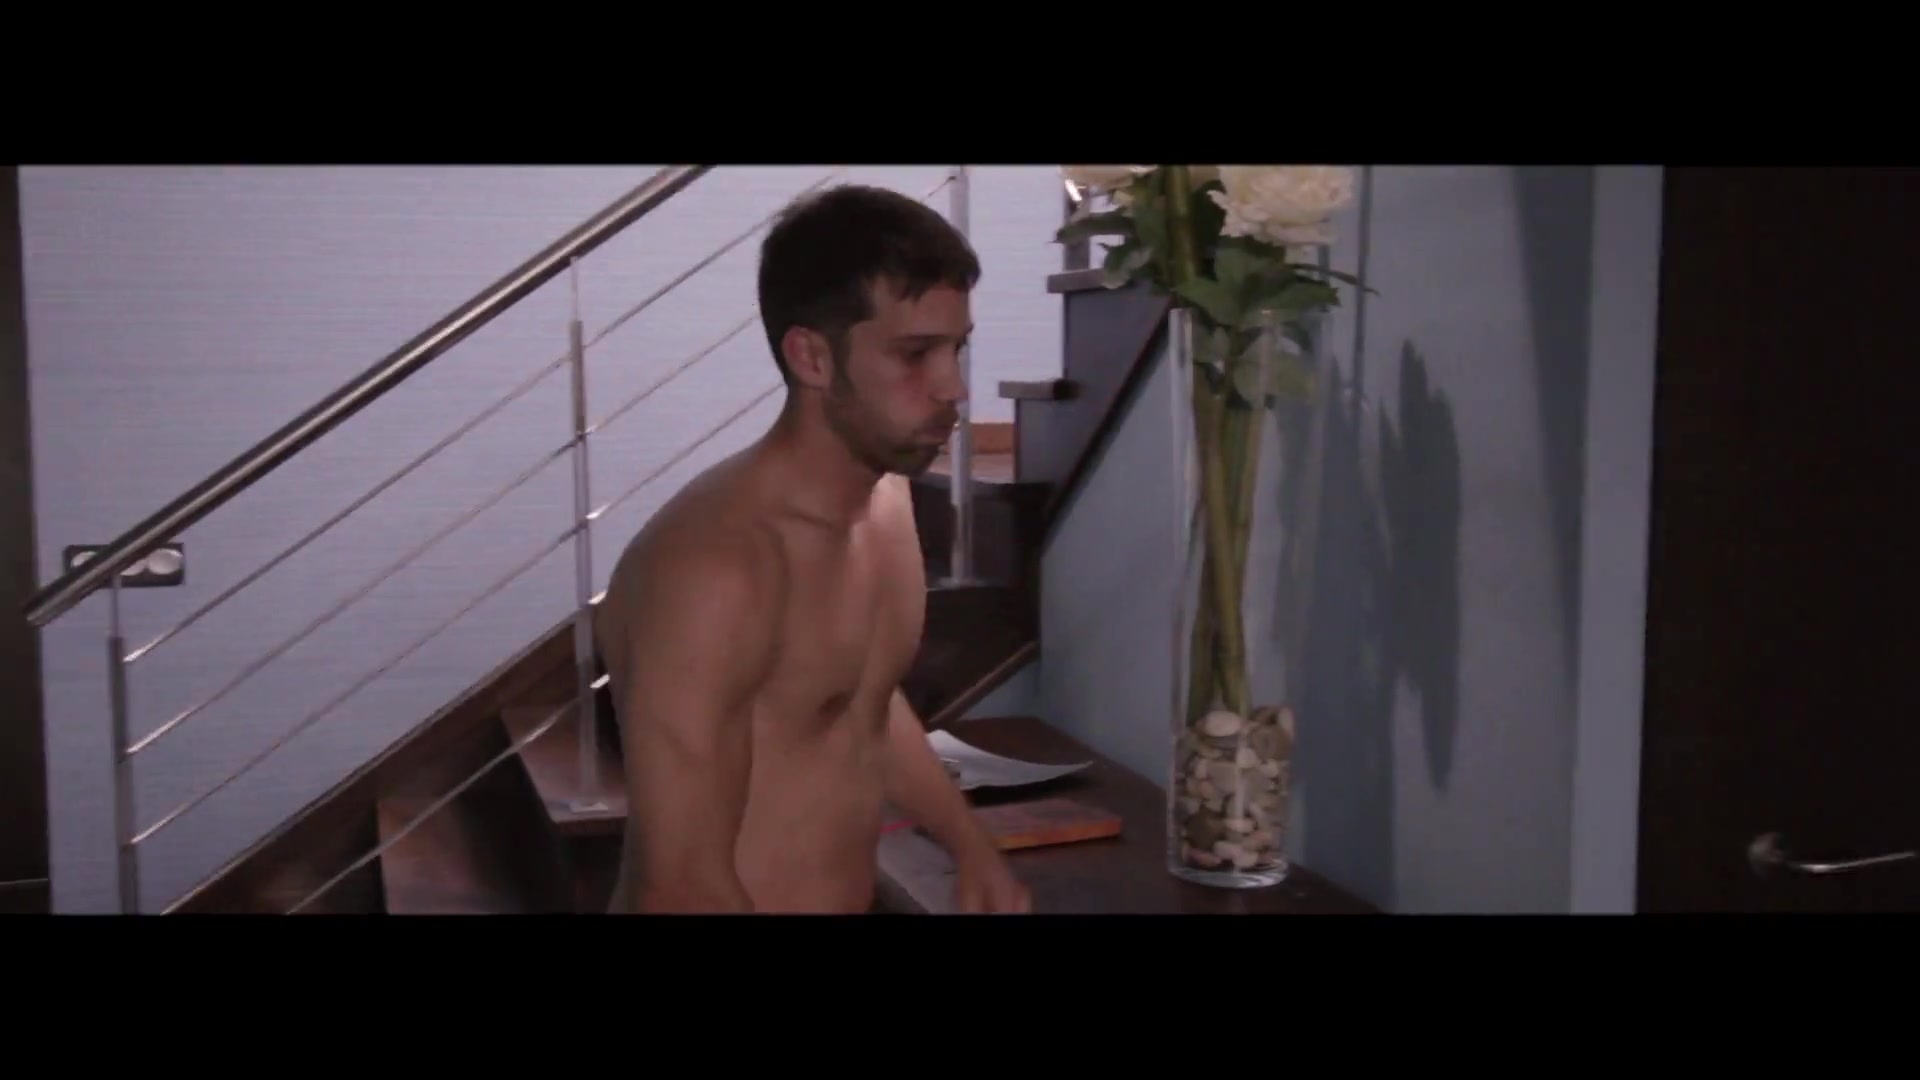 HOT MEN PISSING IN A GREAT MOVIE 2